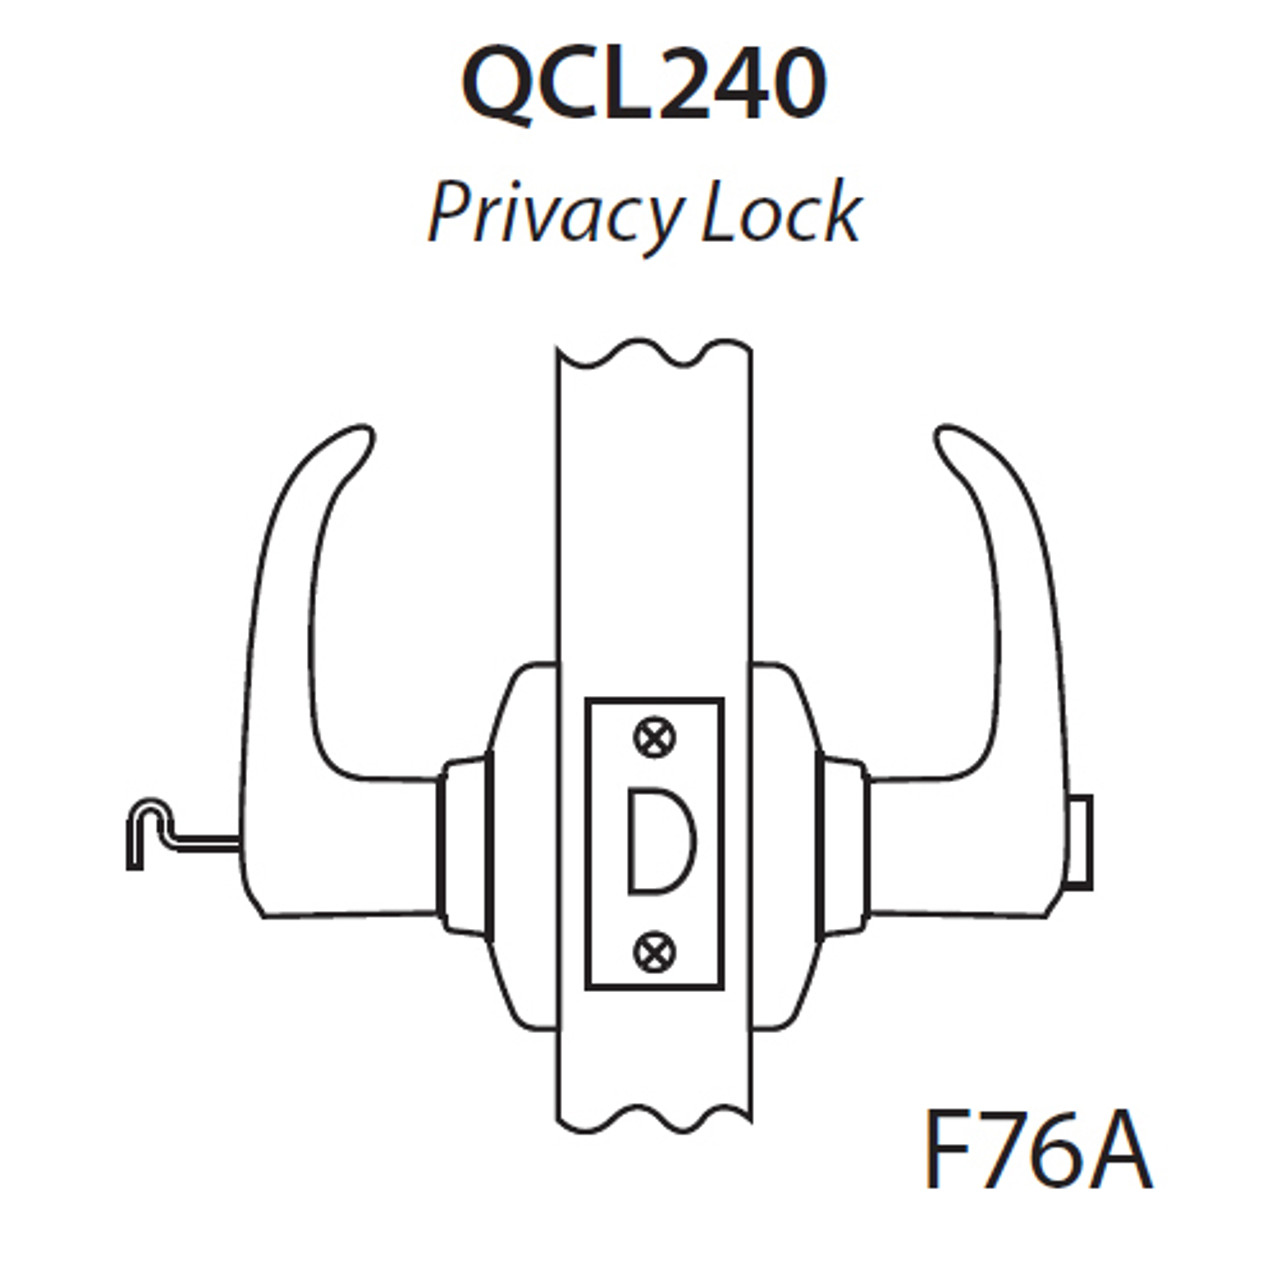 QCL240M613NS4478S Stanley QCL200 Series Cylindrical Privacy Lock with Summit Lever in Oil Rubbed Bronze